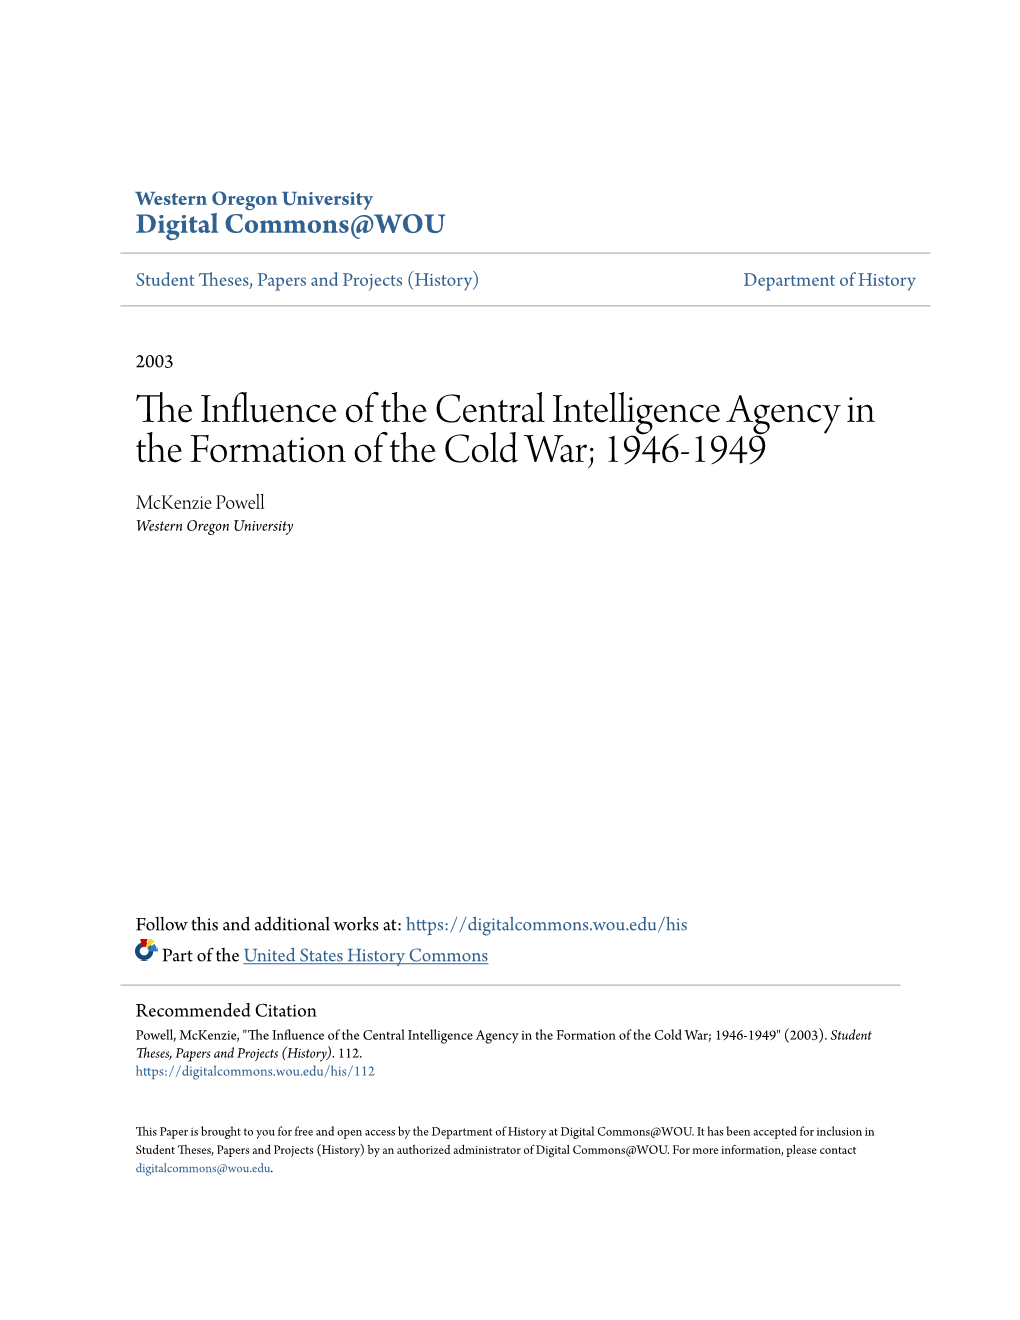 The Influence of the Central Intelligence Agency in the Formation of the Cold War; 1946-1949